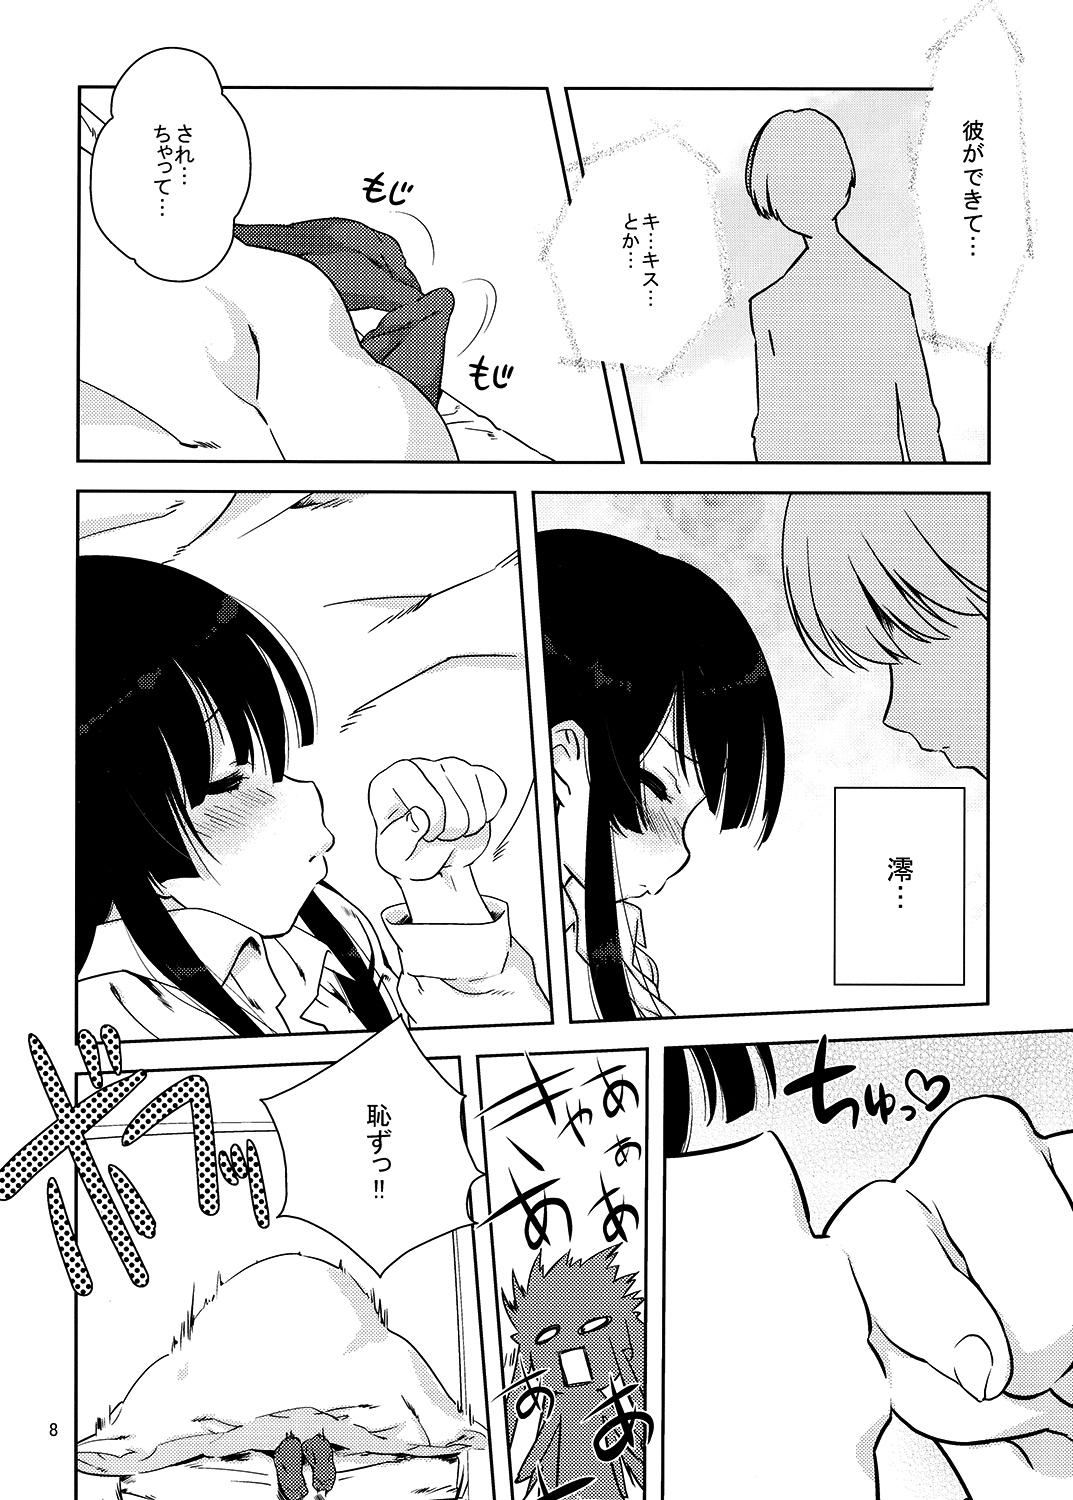 Lovers Mio-tan! - K on Bubble Butt - Page 7